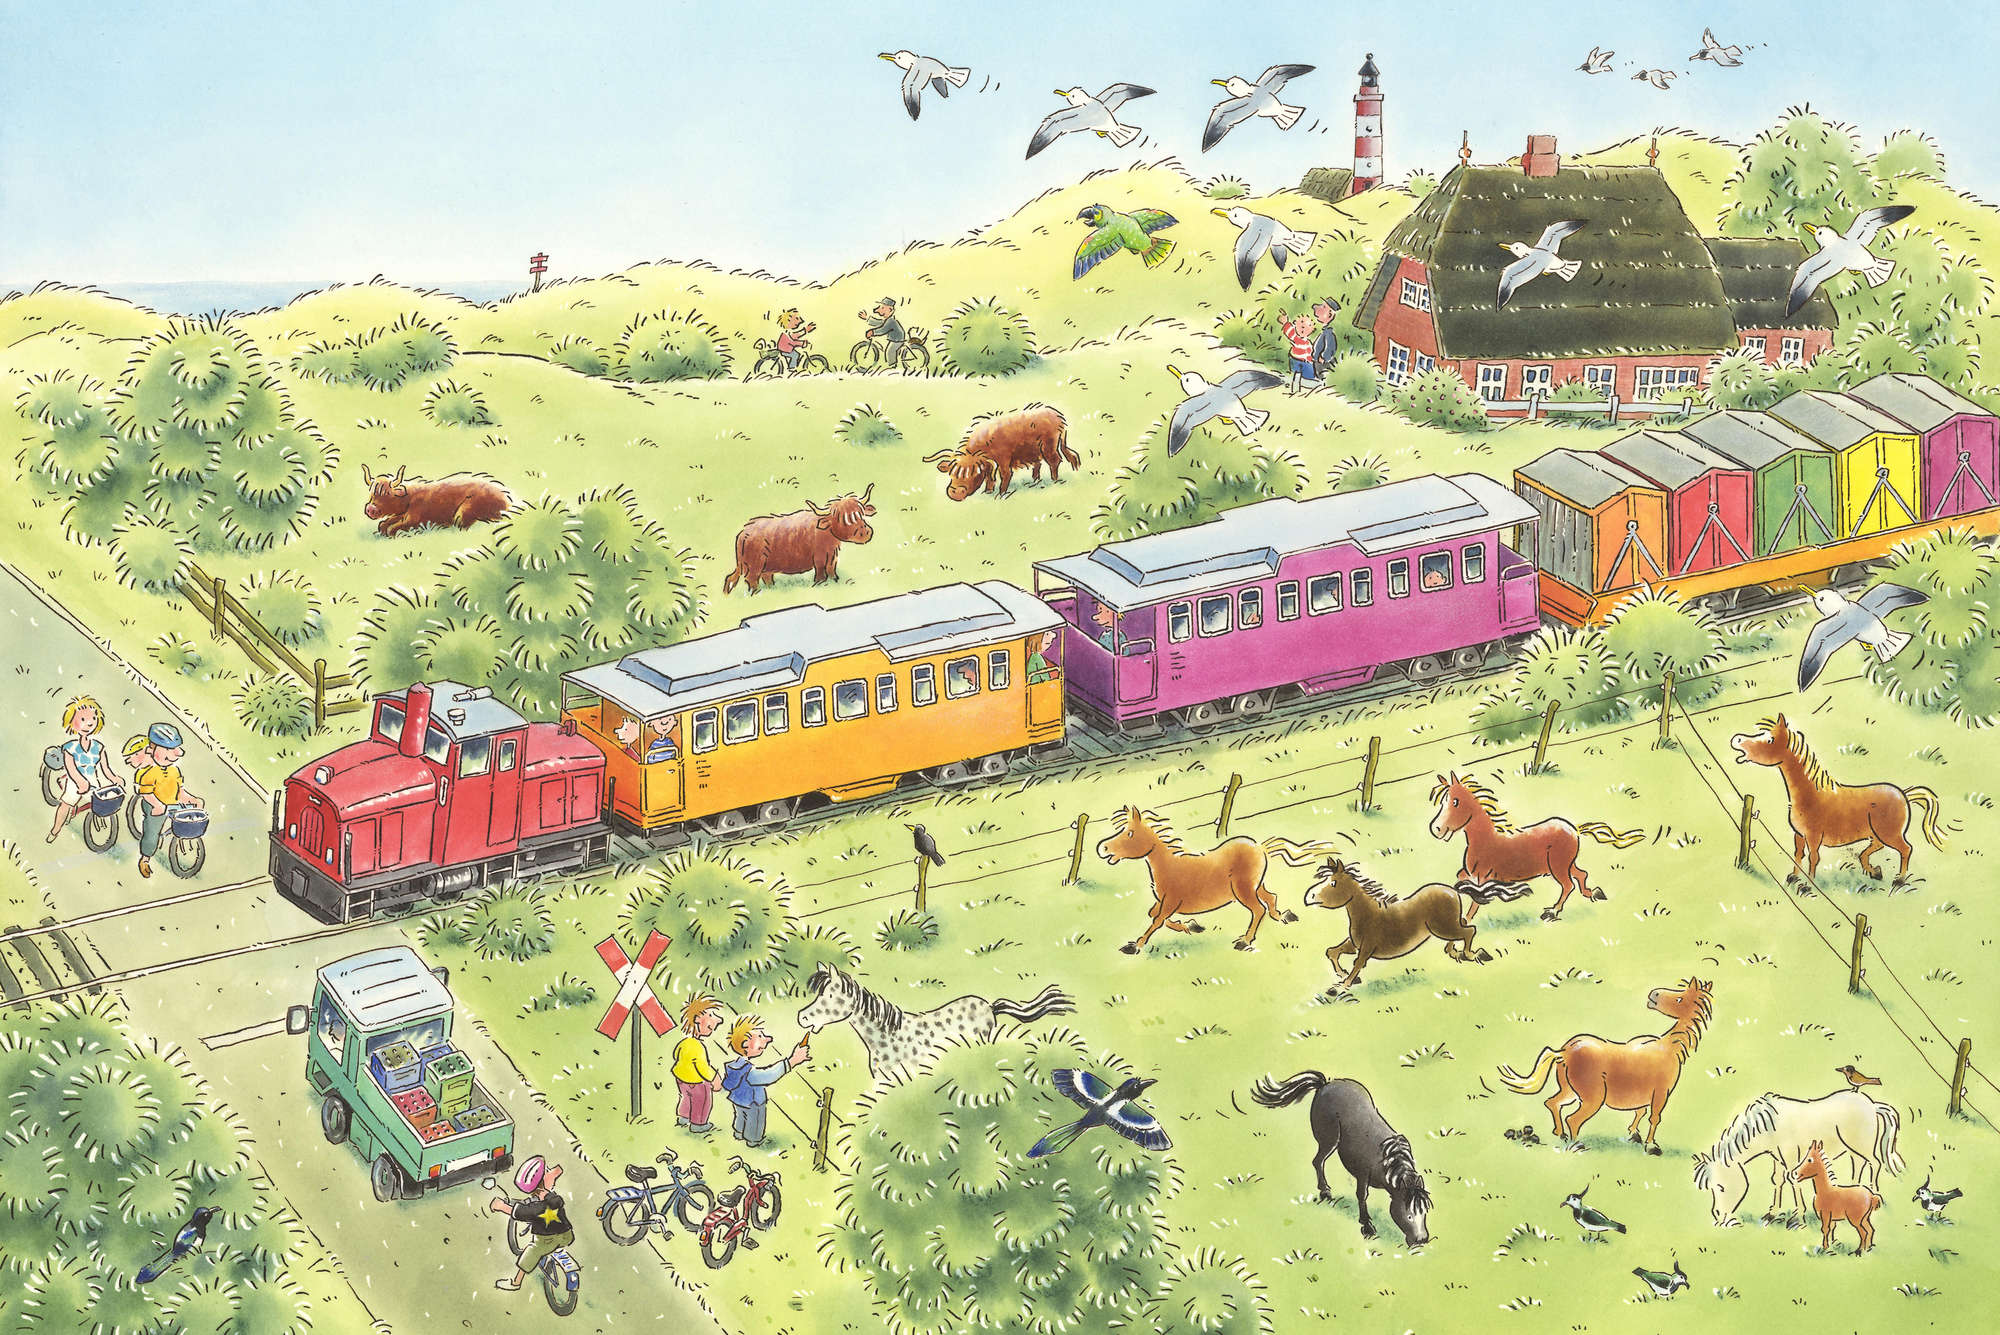             Children mural railroad crossing with train and animals on matt smooth non-woven
        